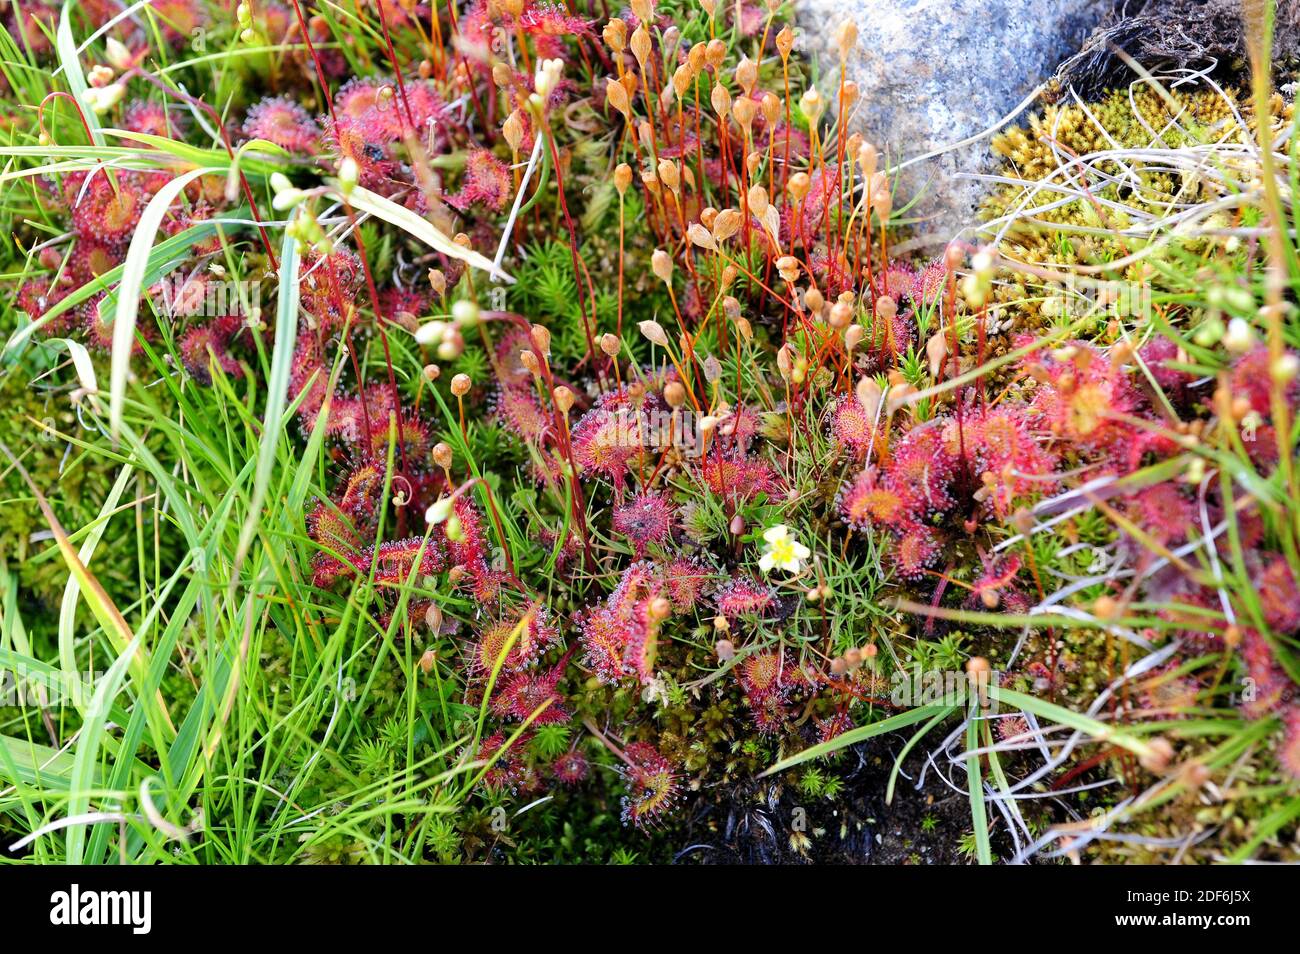 Common sundew or round-leaved sundew (Drosera rotundifolia) is a carnivorous plant with a circumboreal distribution but present in the mountains of Stock Photo